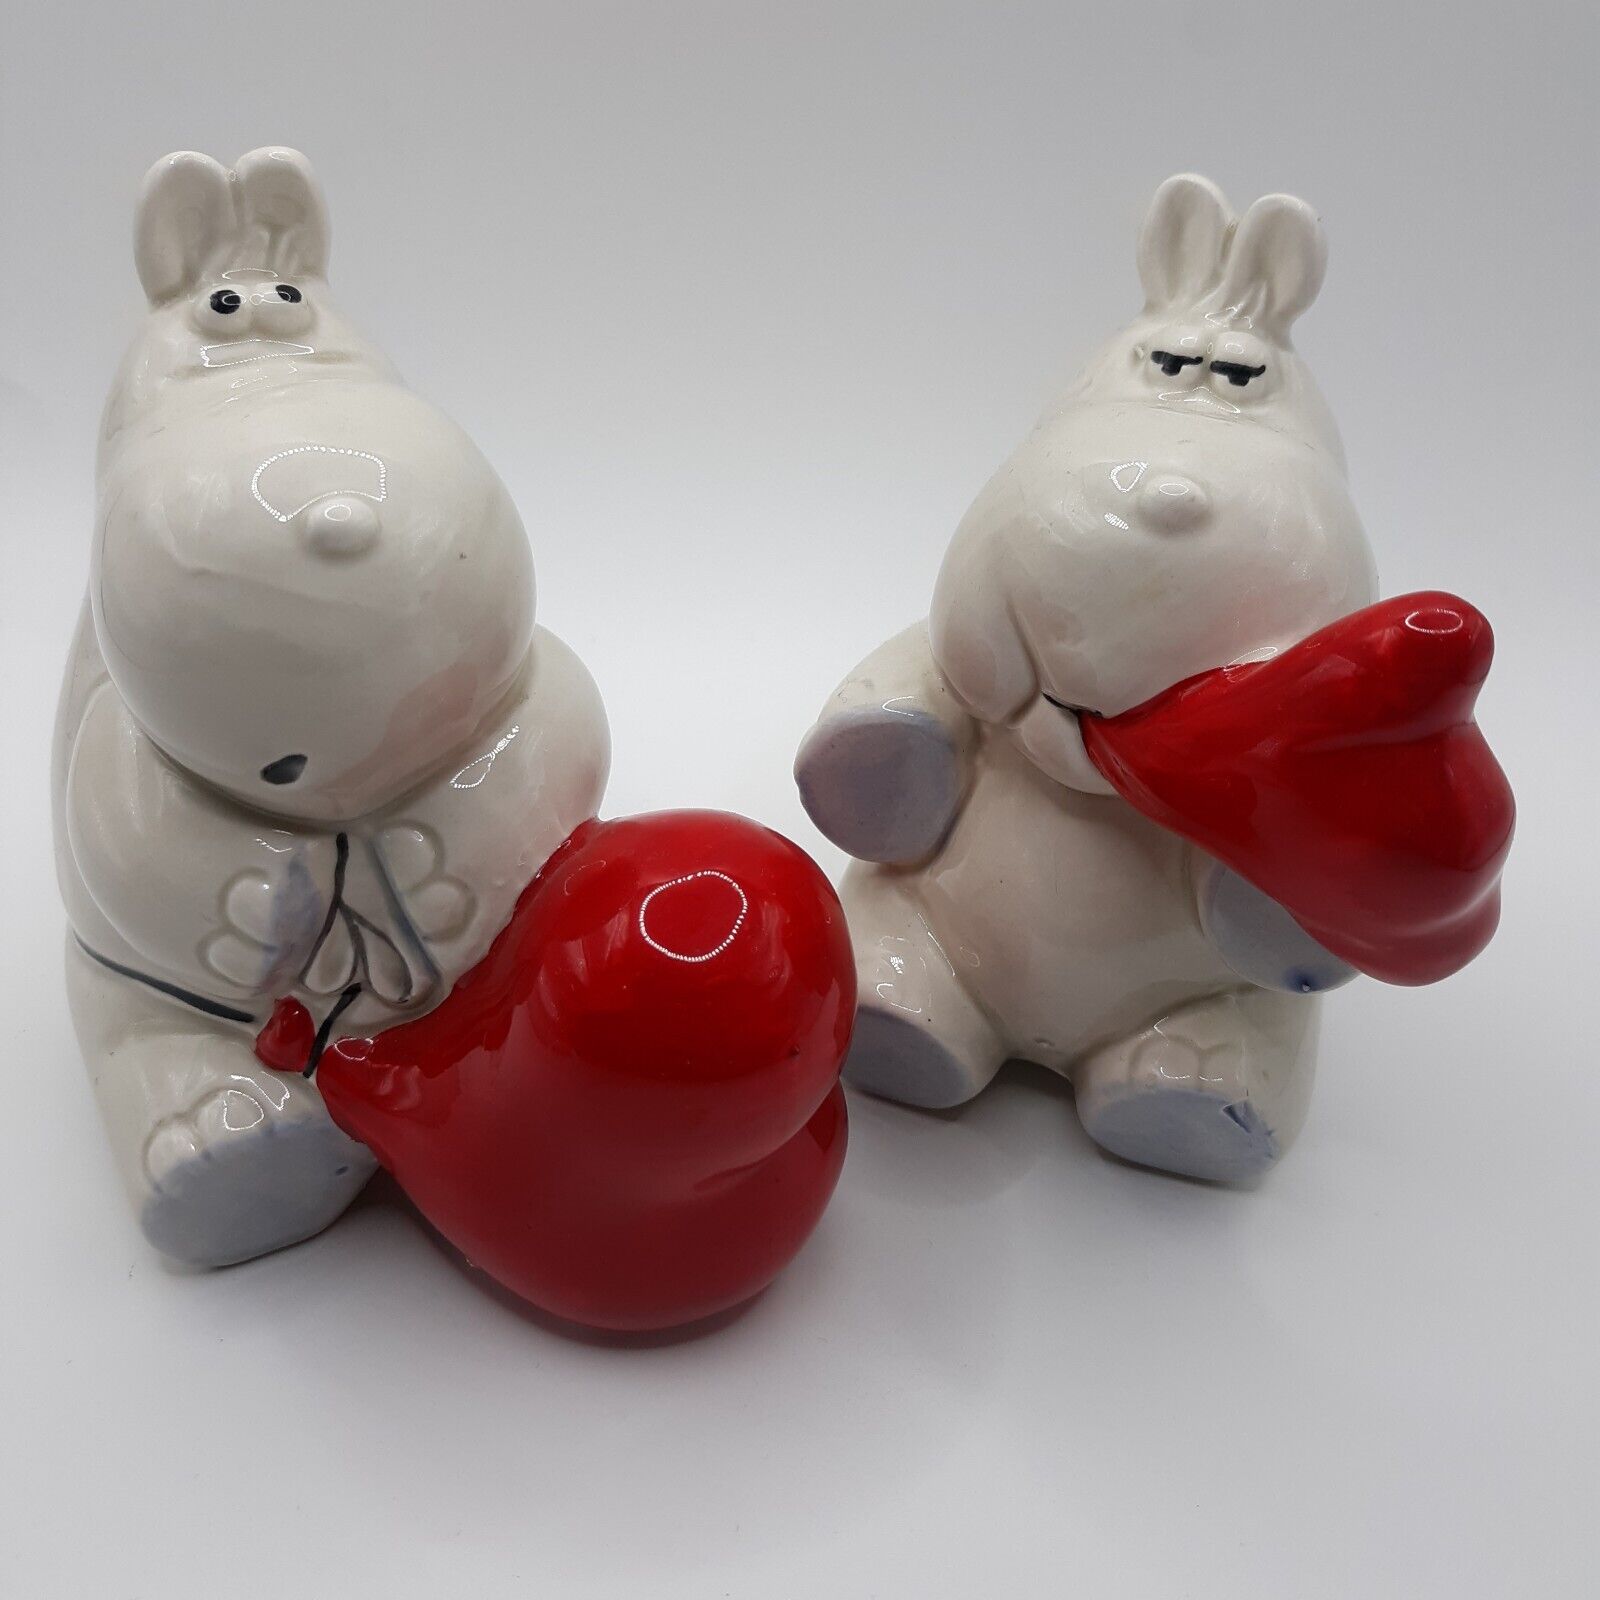 Enesco Salt and Pepper Shakers Novelty Hippos With Balloons